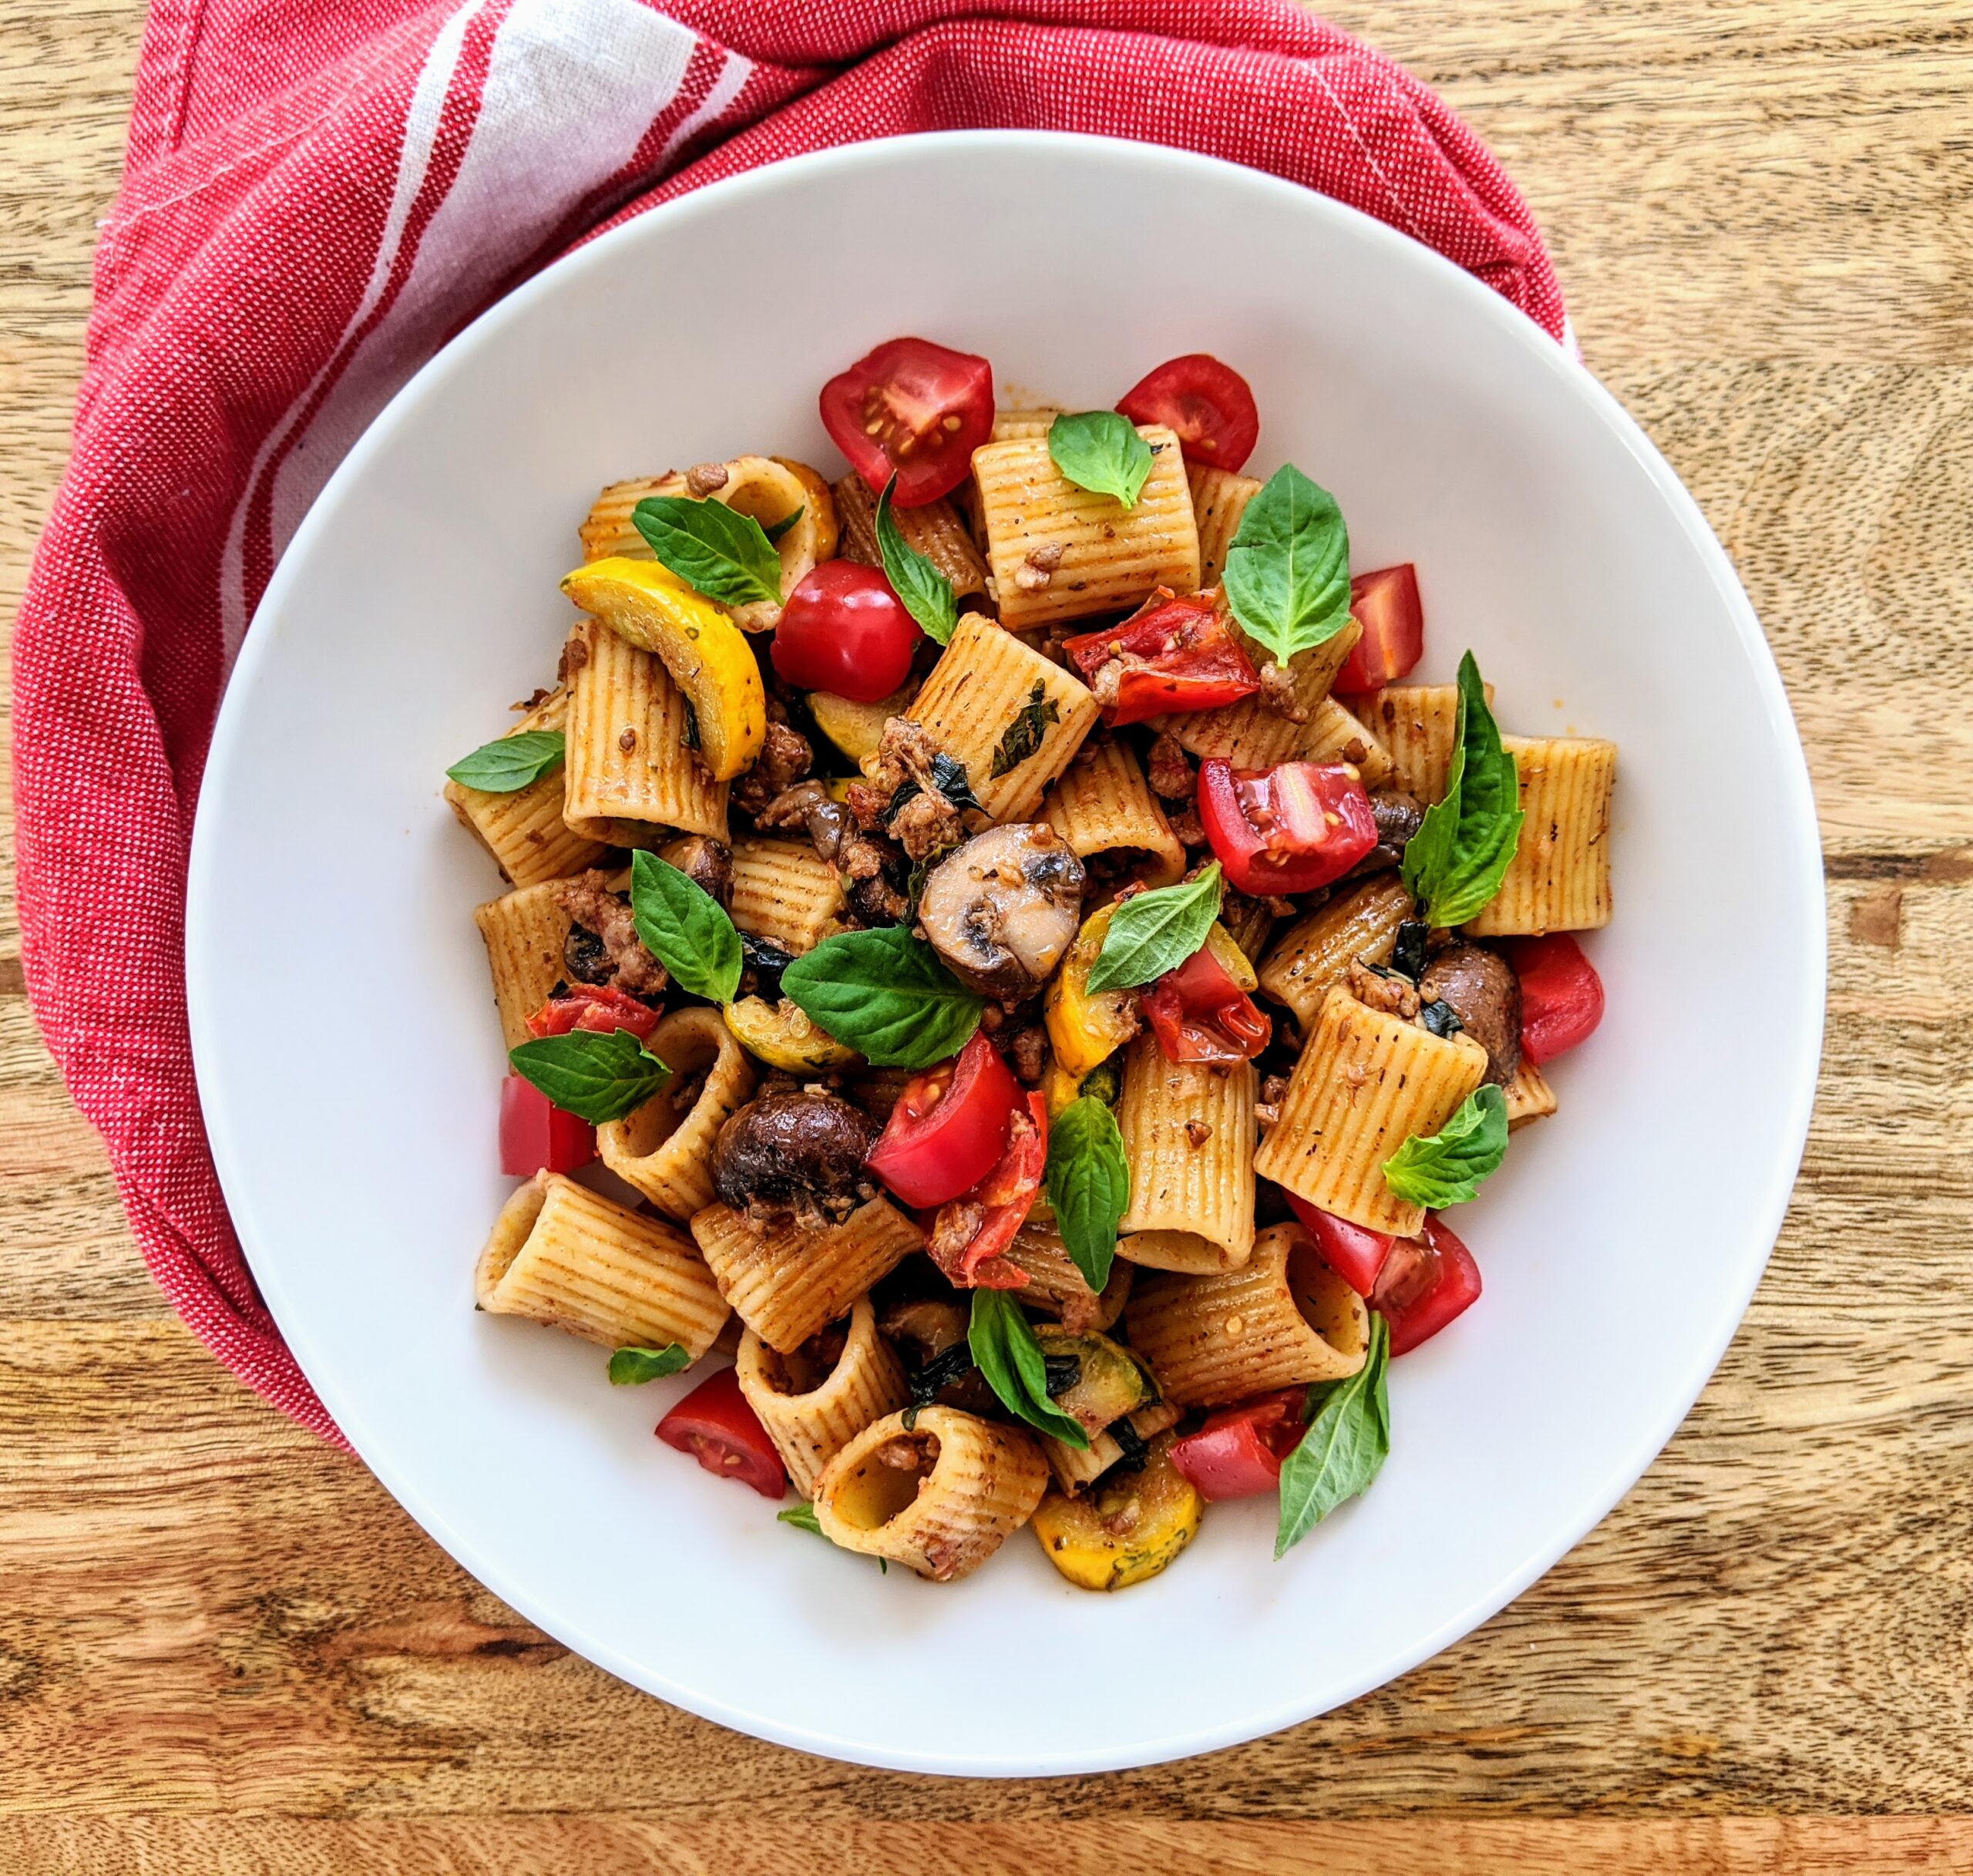 A vibrant bowl of pasta laced with yellow zucchini, mushrooms, tomatoes, and savory sausage. Garnished with fresh basil leaves.